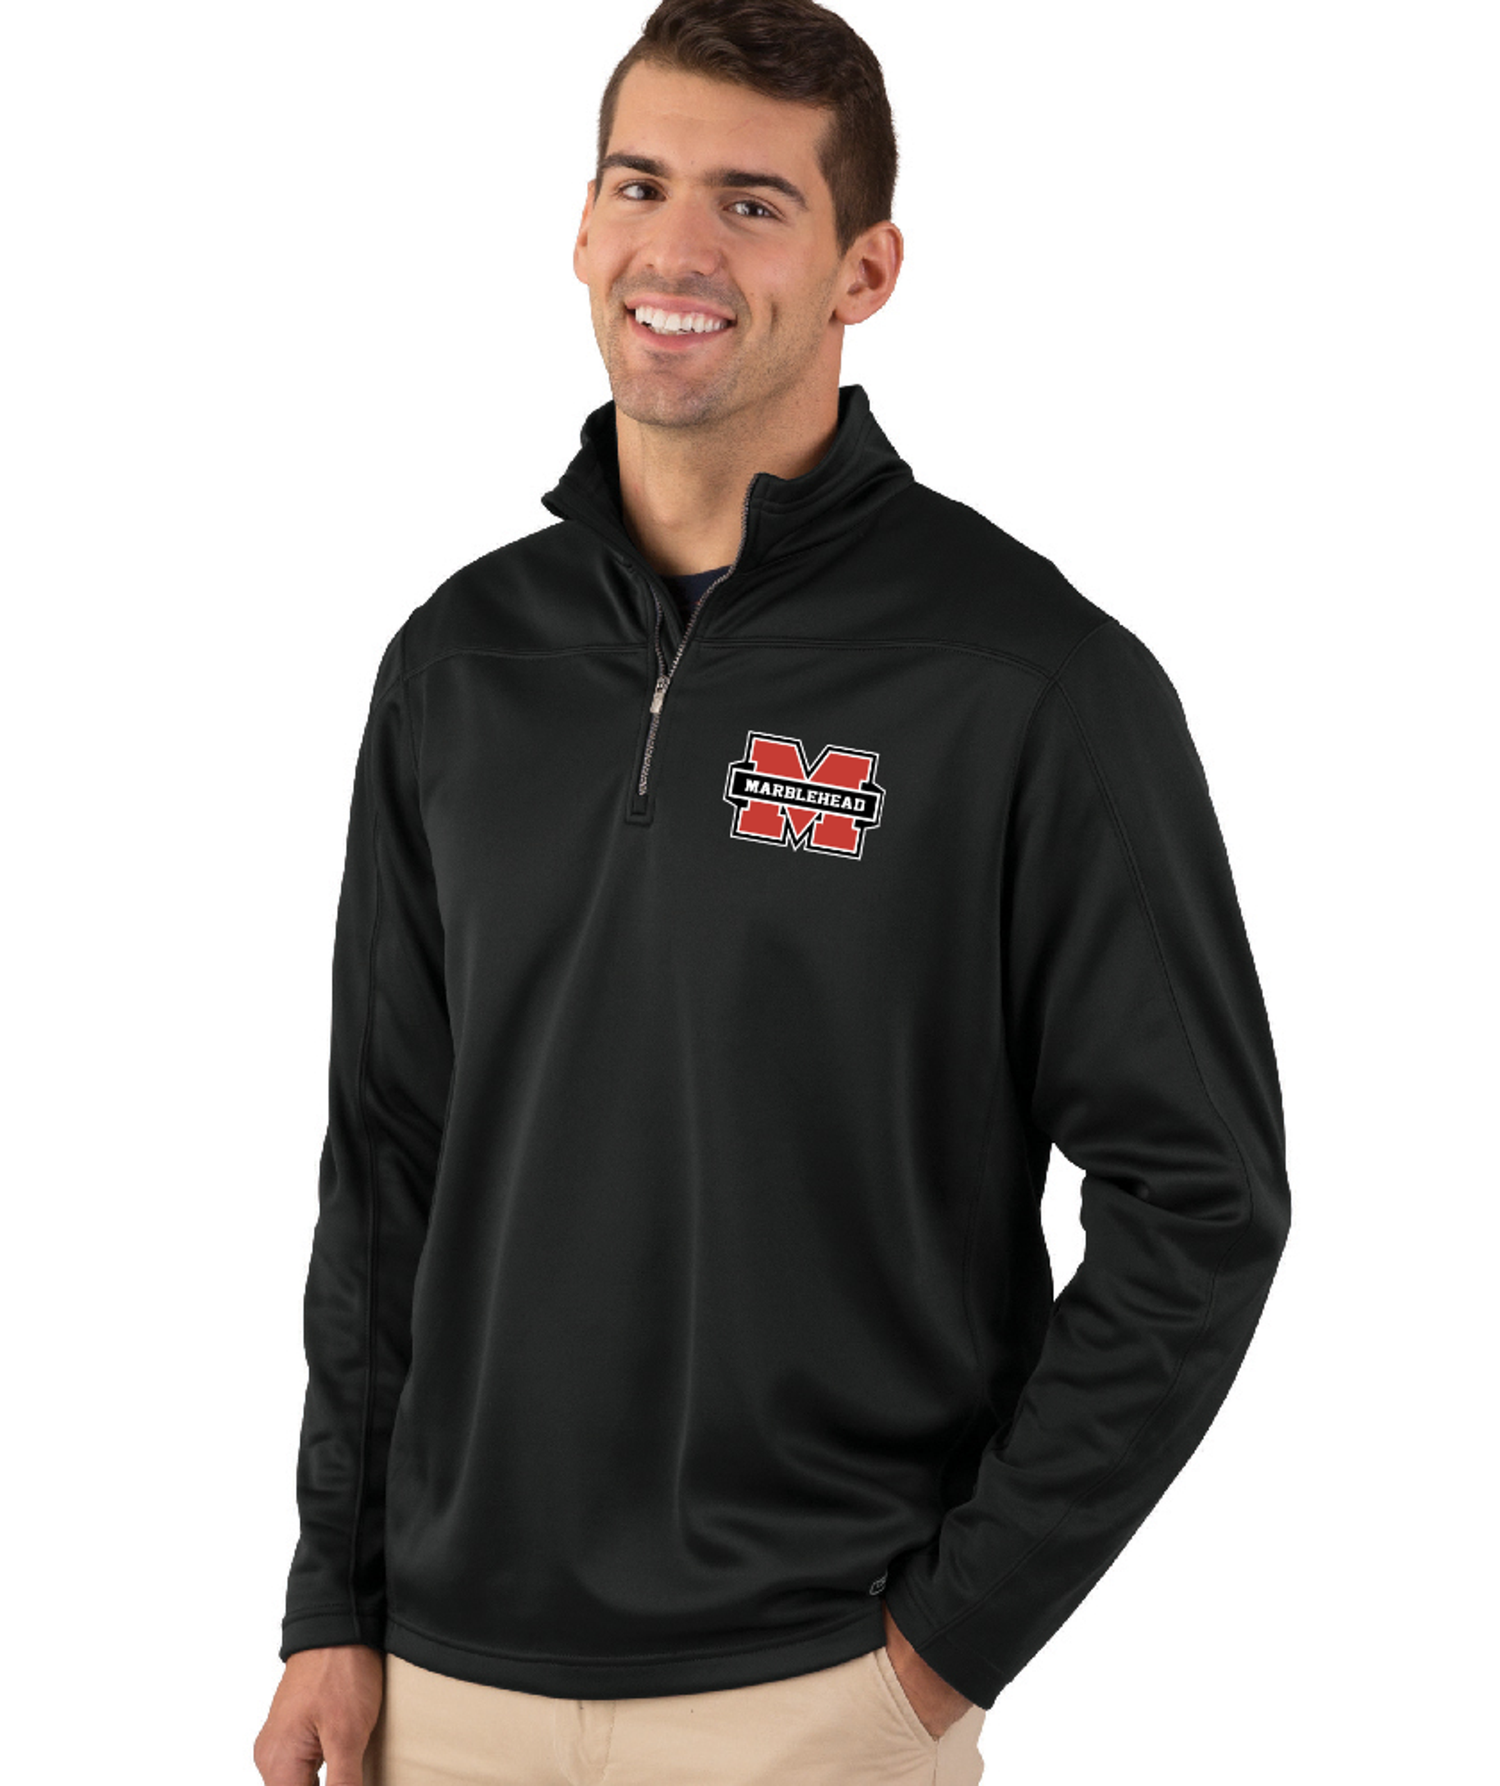 Marblehead Embroidered Stealth Zip Pullover